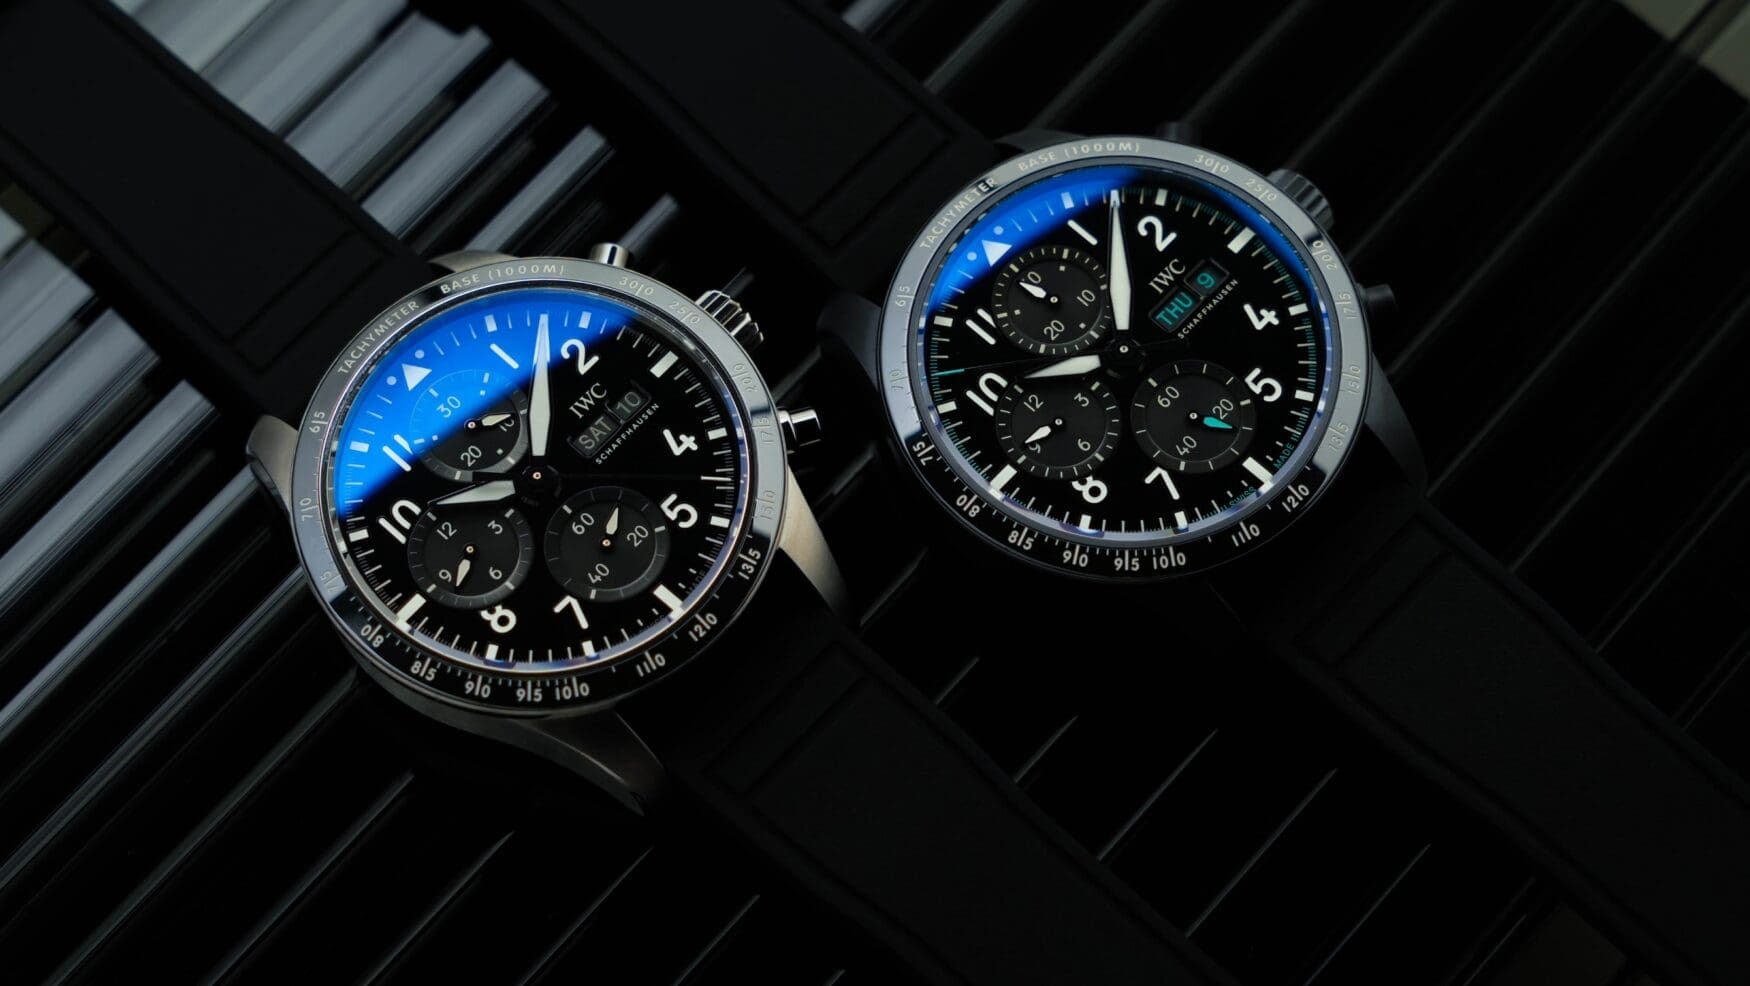 The IWC Pilot’s Watch Performance Chronograph 41, a Mercedes F1 collab, is the brand’s first proper racing chronograph